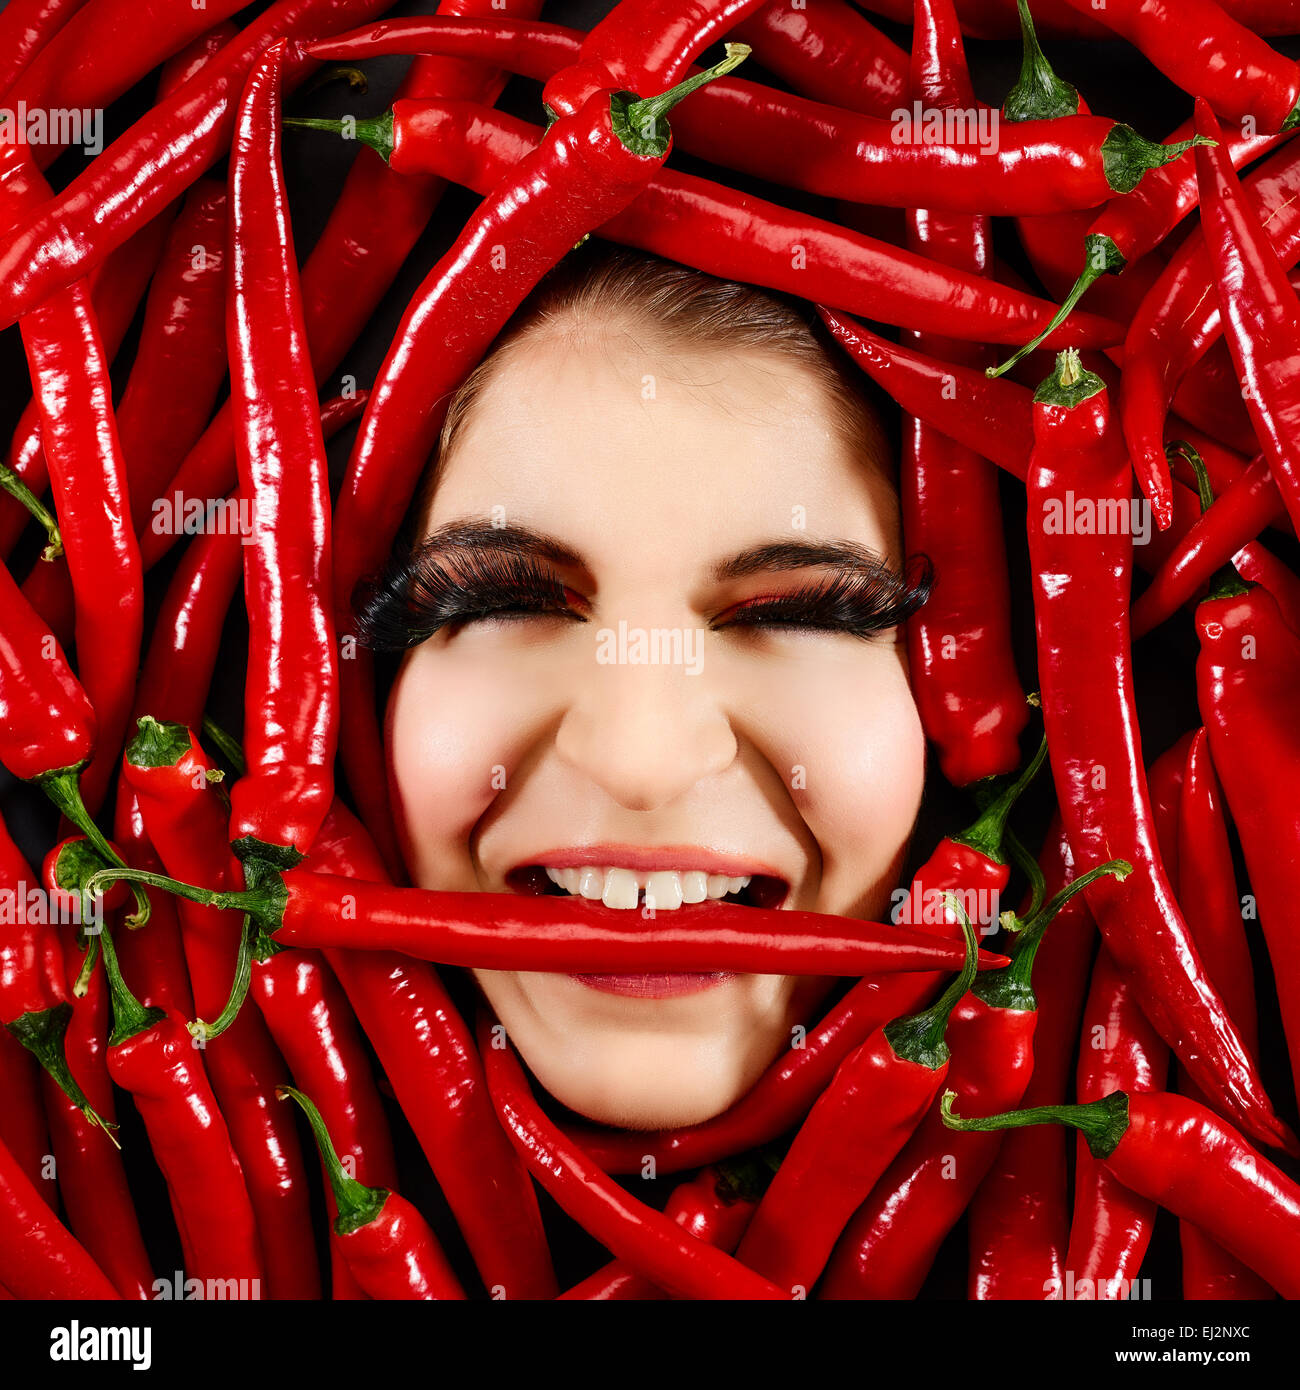 Beautiful woman expression face with red chili pepper frame Stock Photo